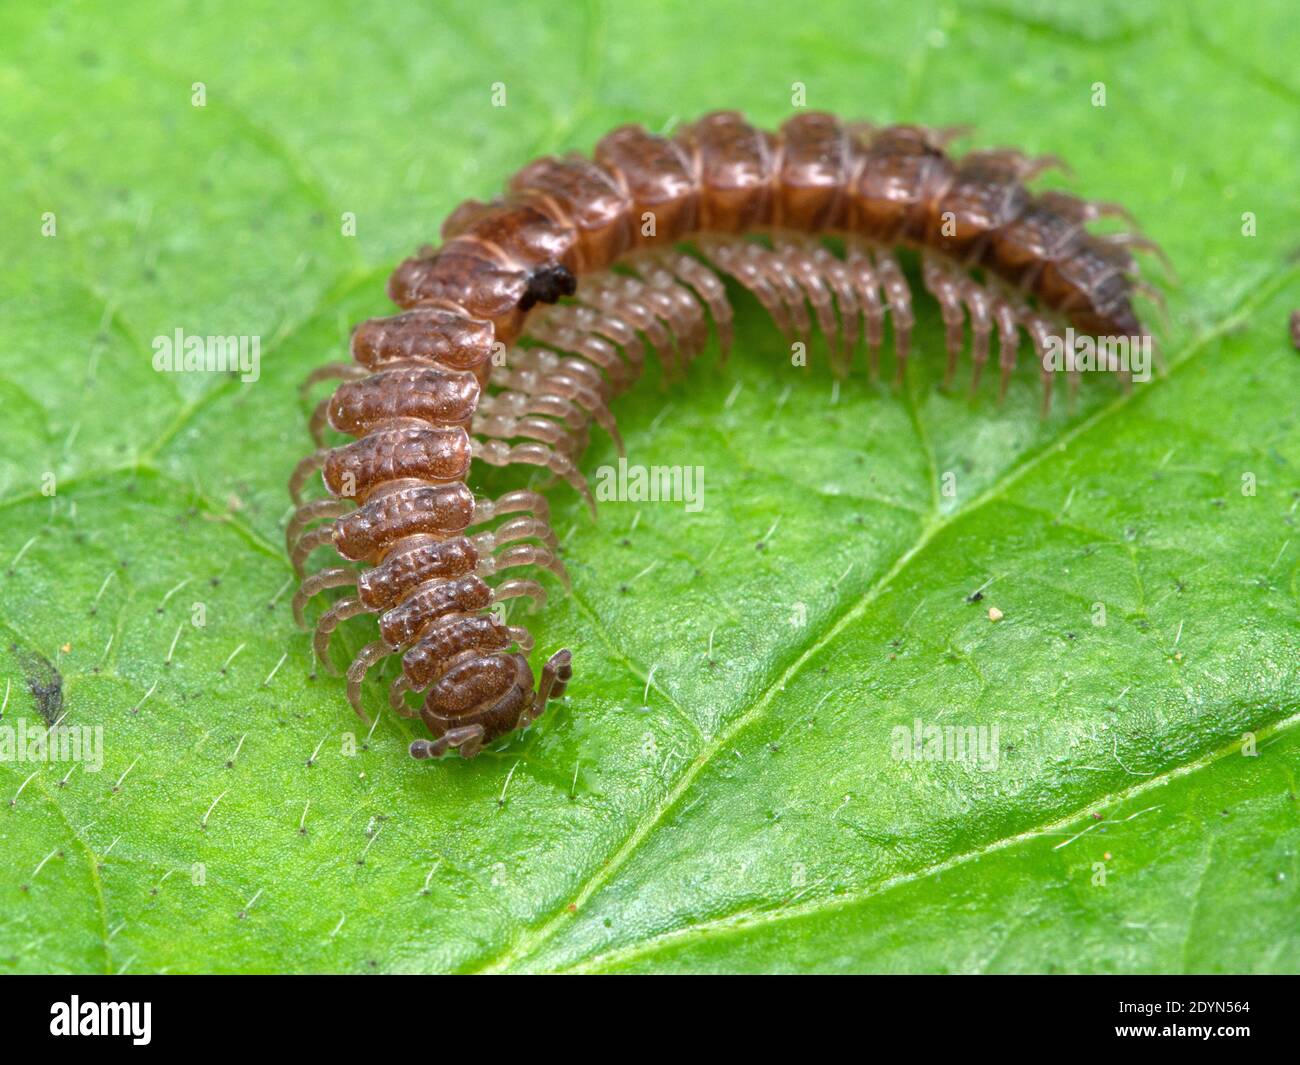 close-up of a flat-backed millipede (Polydesmus) crawling on a green leaf in Delta, British Columbia, Canada Stock Photo